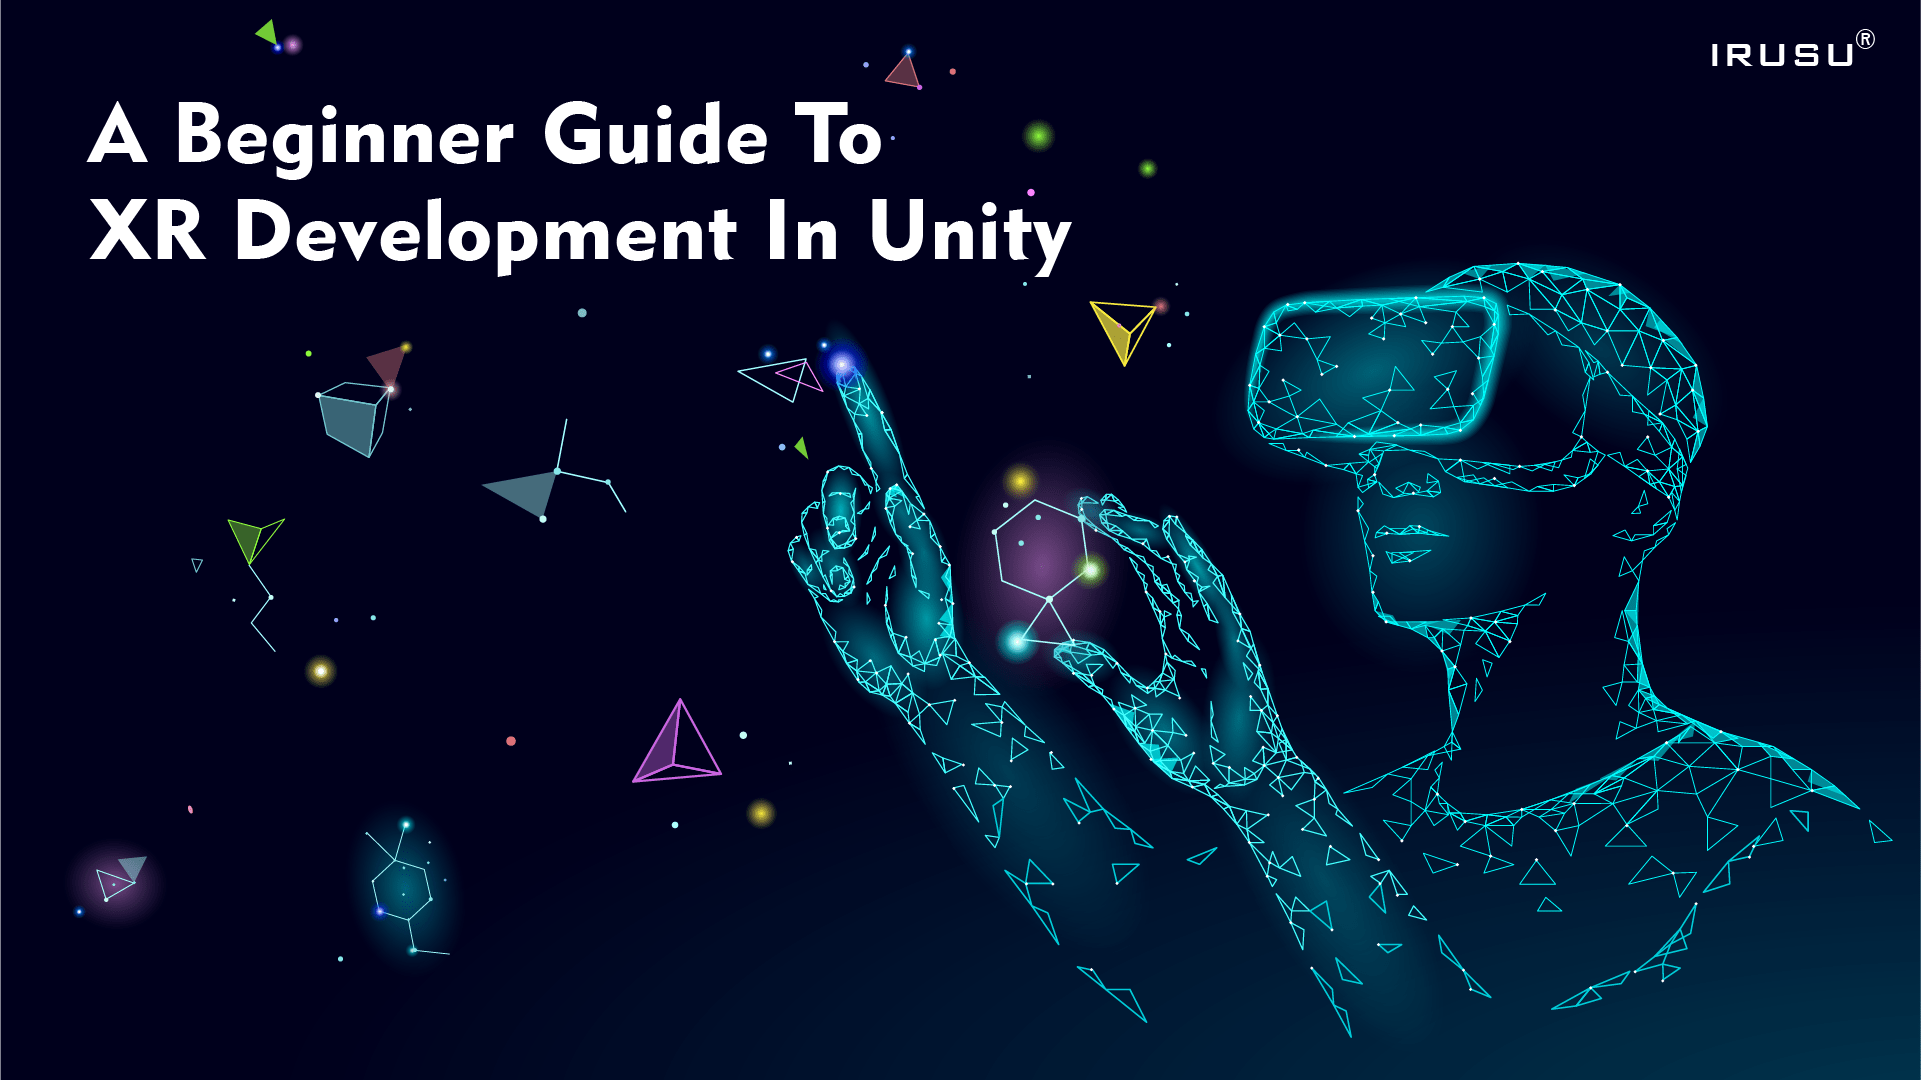 A beginner guide to XR development in Unity.